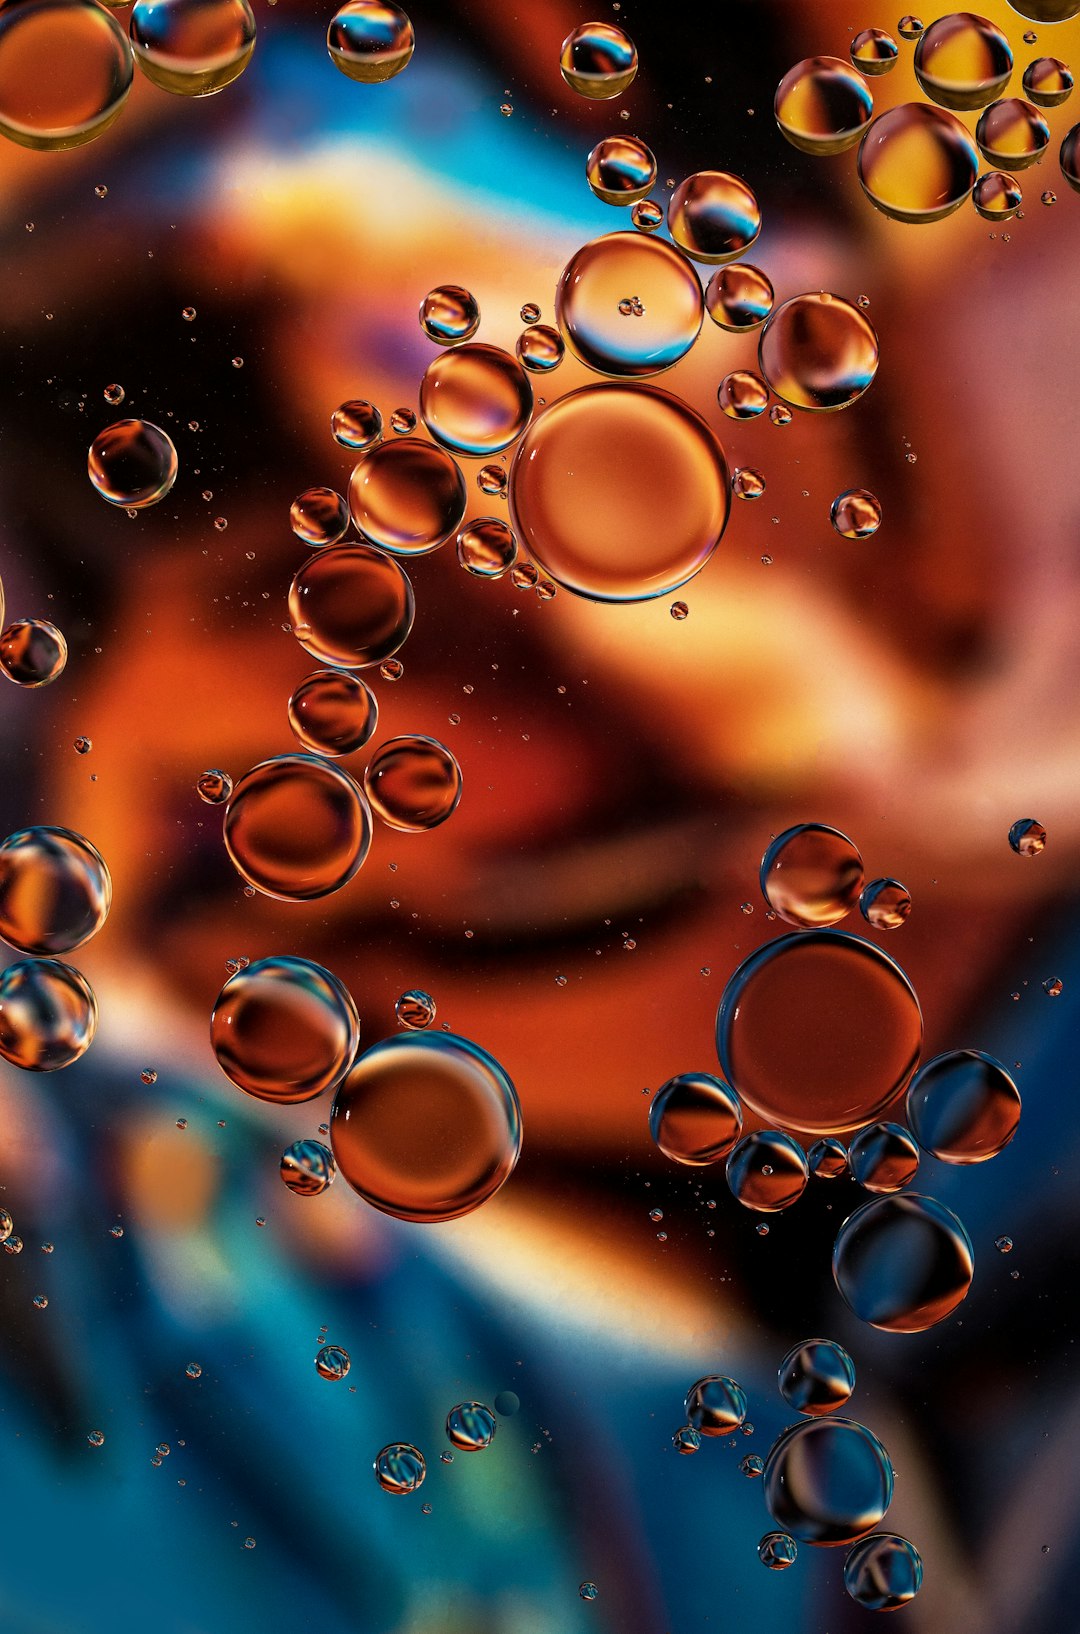 "Copper Glow". Oil drops on water. The background is an A3 photocopy of one of Unsplash photographer Vinicius Amano's fantastic photos. Please see the tutorial on the page "Oil and water photography" on my site Tracts4free.WordPress.com.